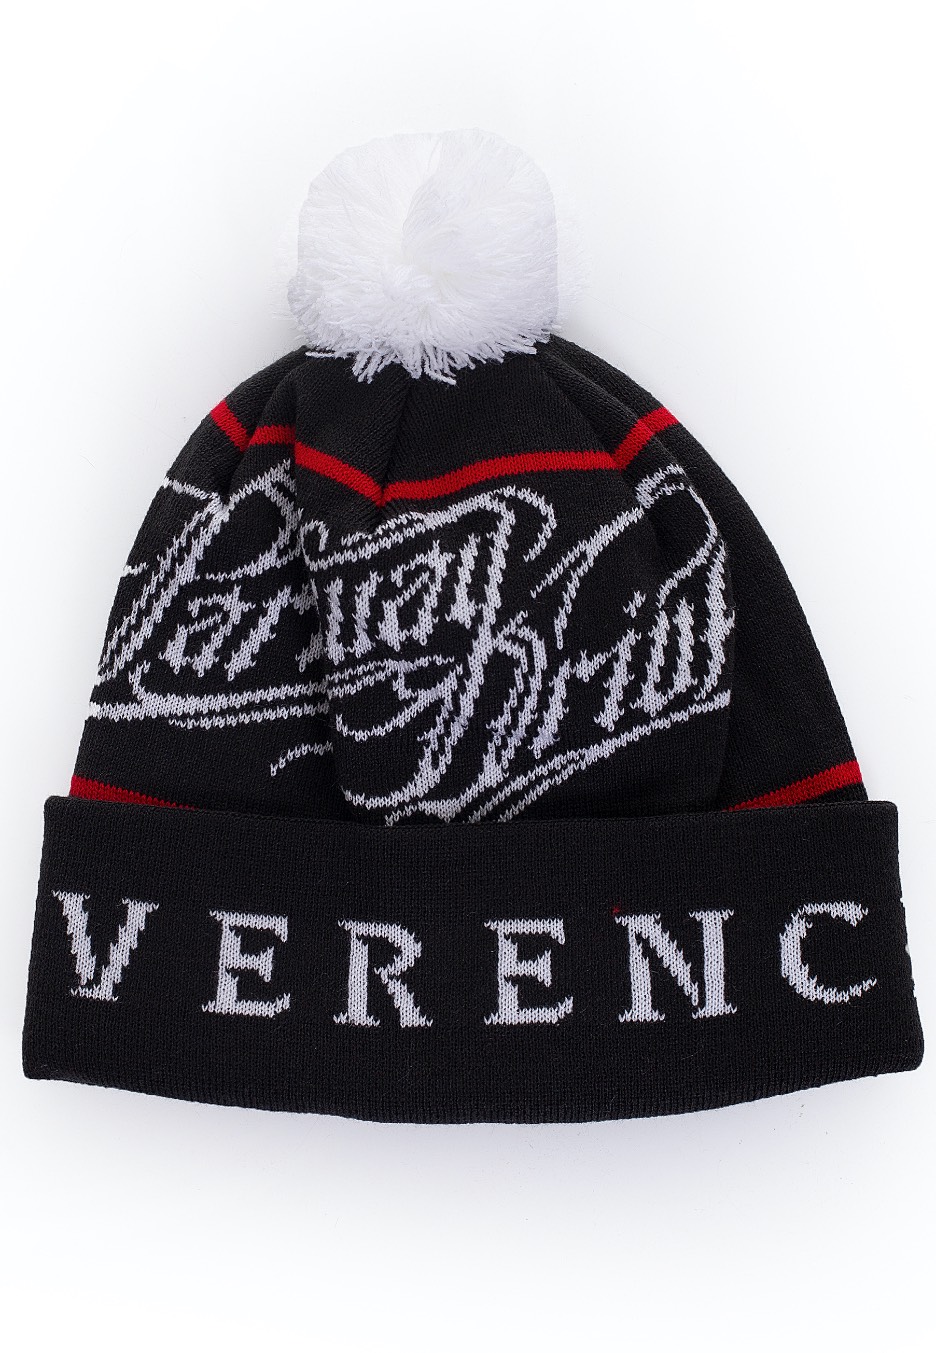 Parkway Drive - Reverence Charcoal - Beanies